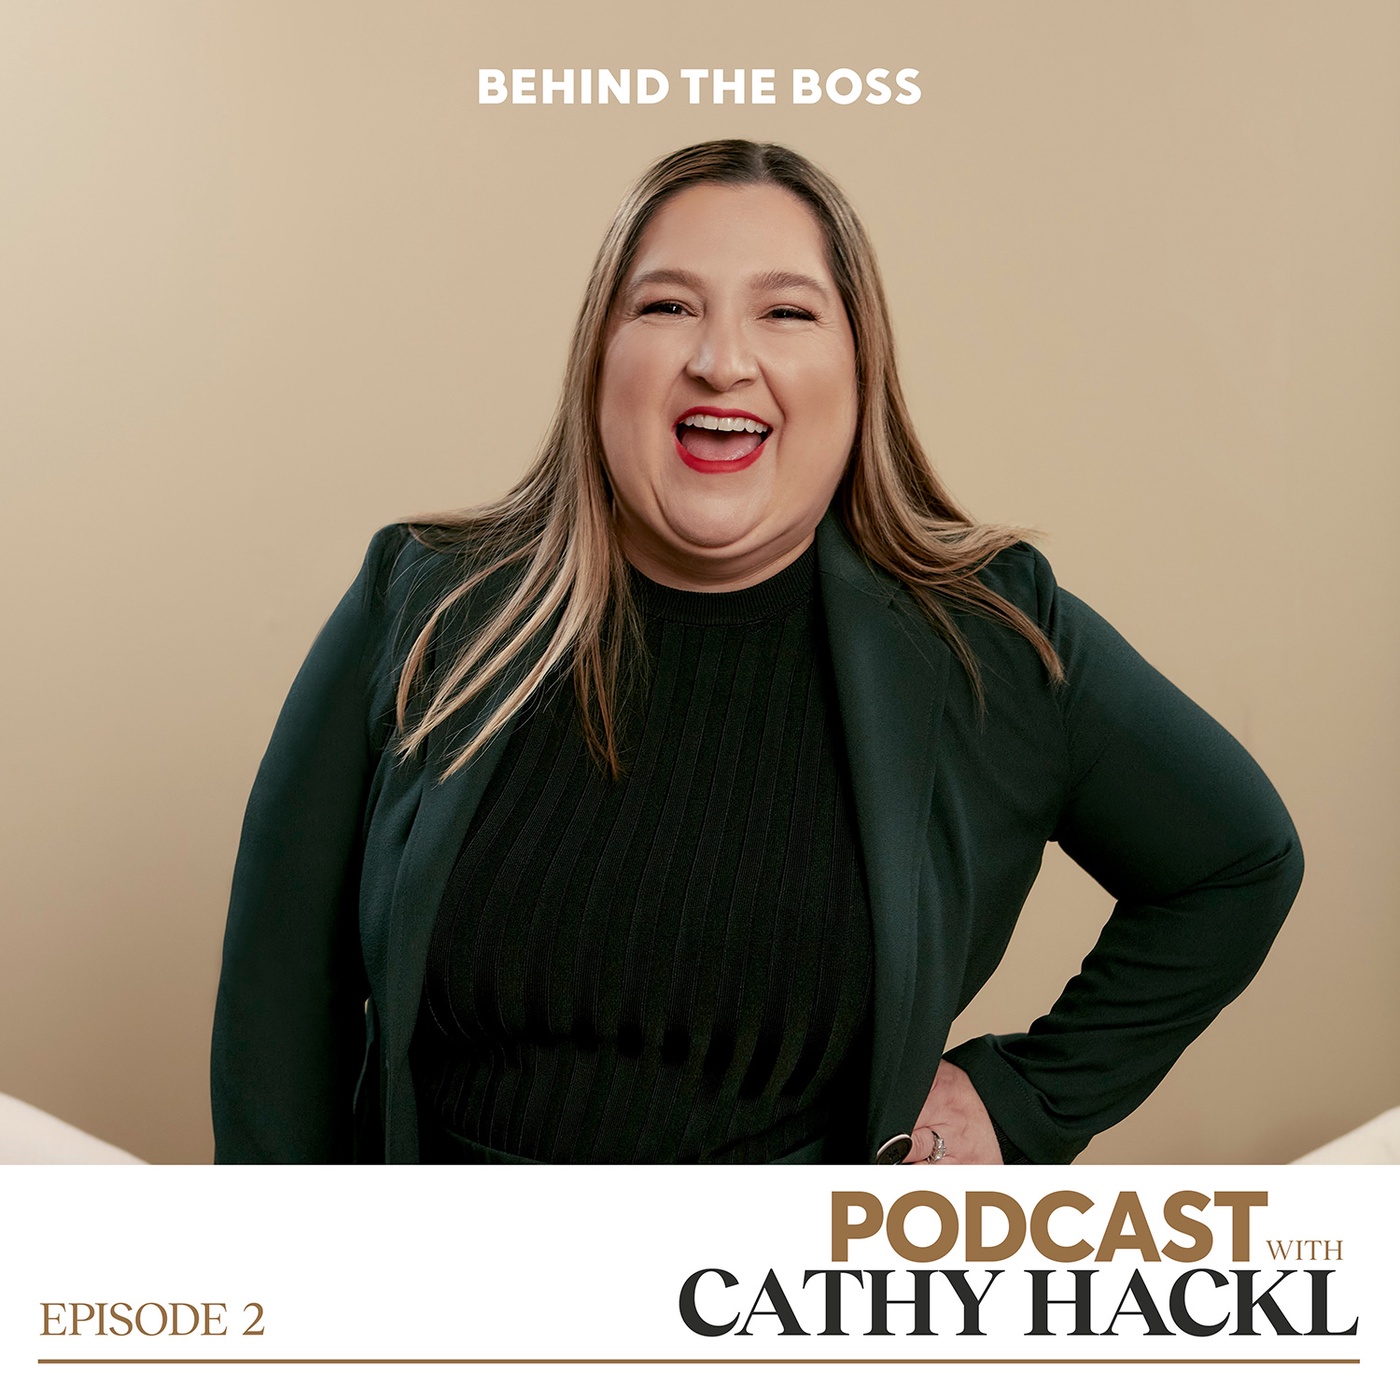 #2 Cathy Hackl - Co-founder & Chief Metaverse Officer at Journey